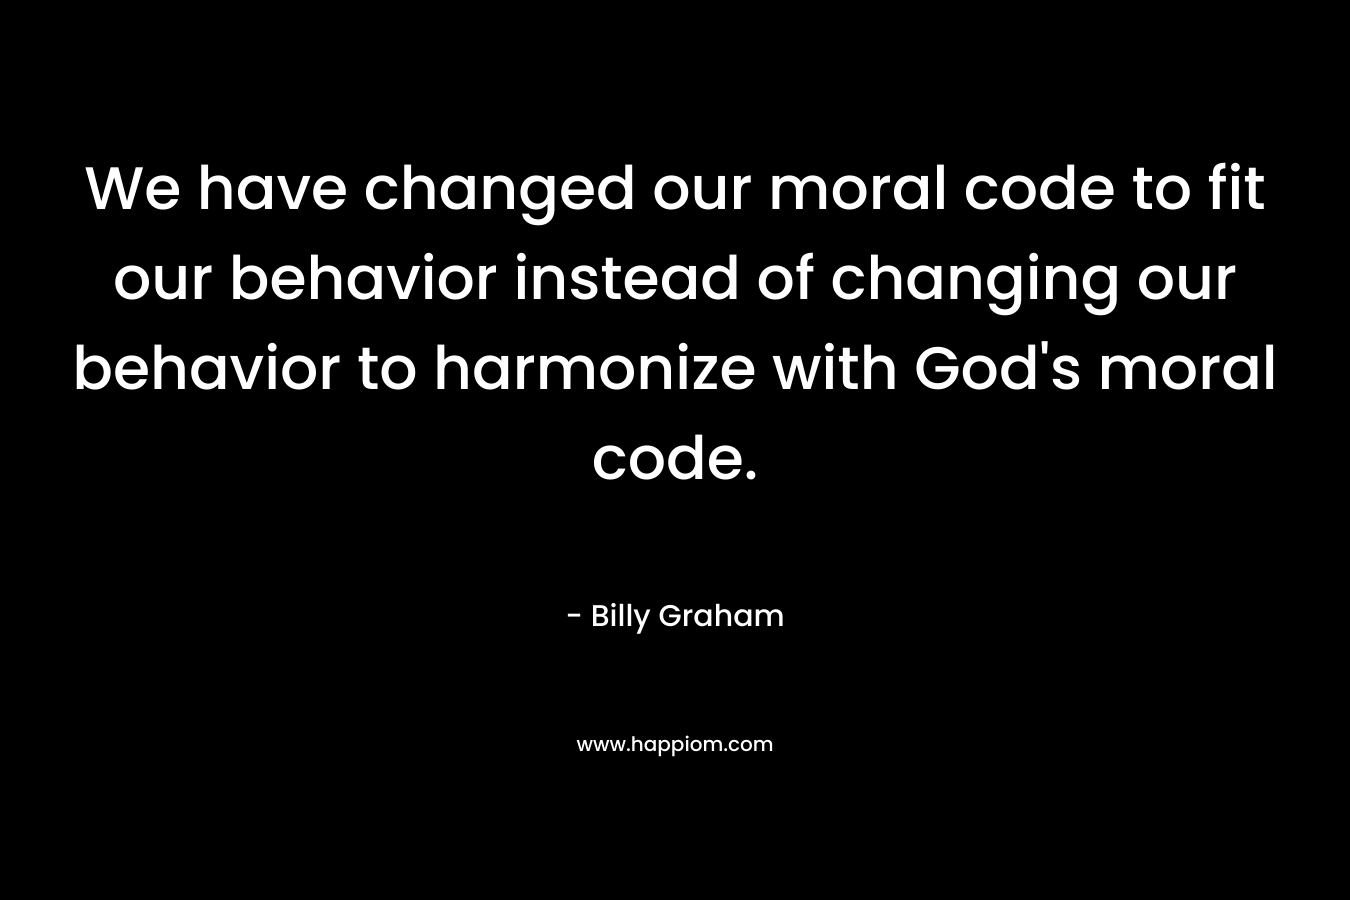 We have changed our moral code to fit our behavior instead of changing our behavior to harmonize with God's moral code.